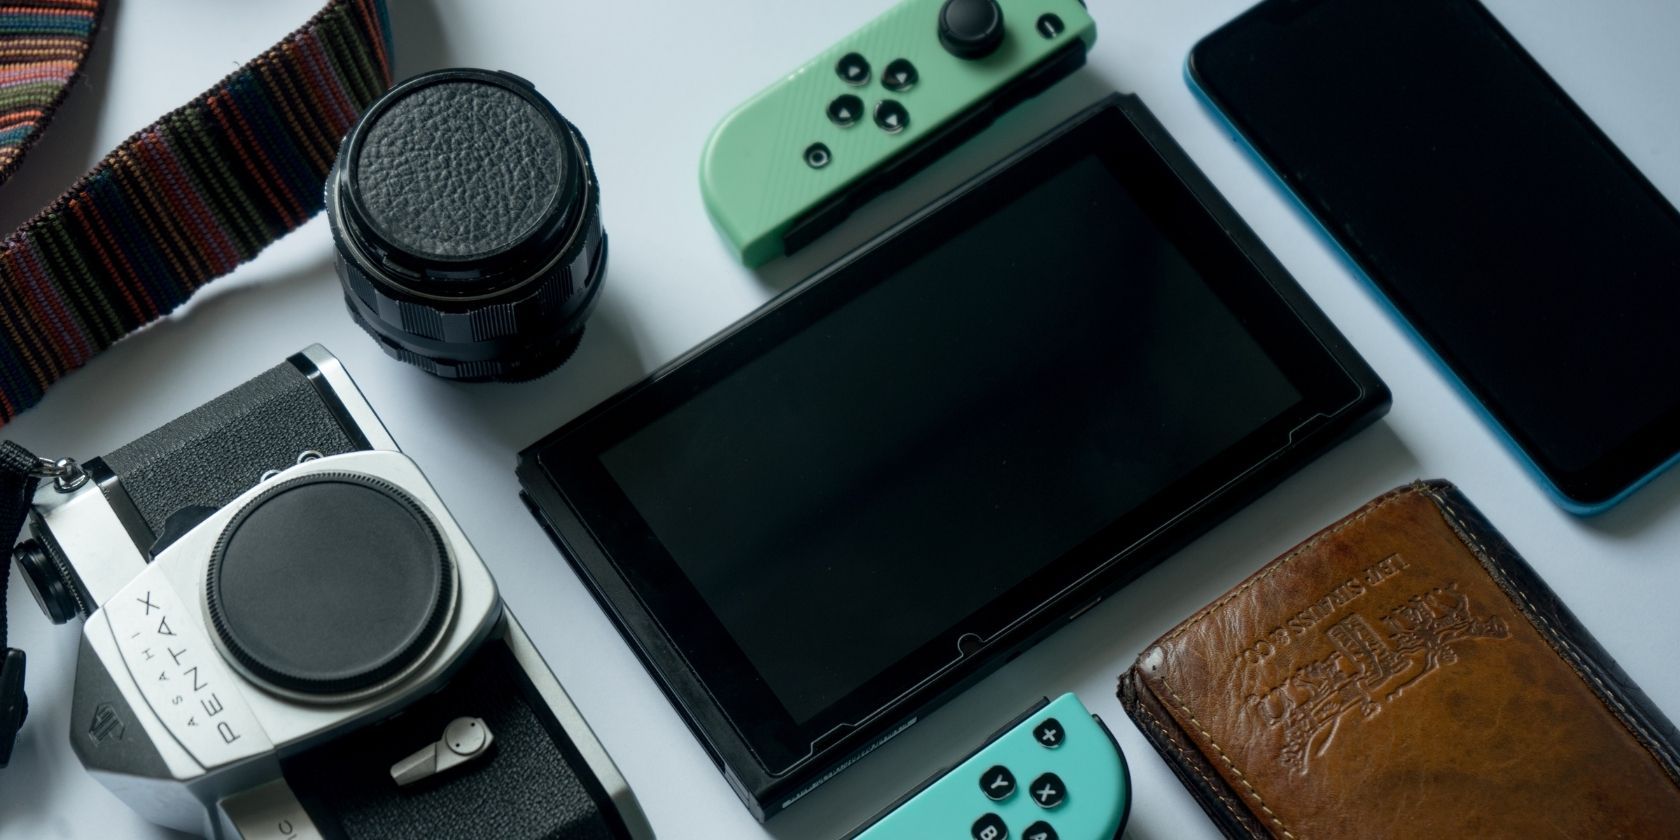 Nintendo Switch and Accessories